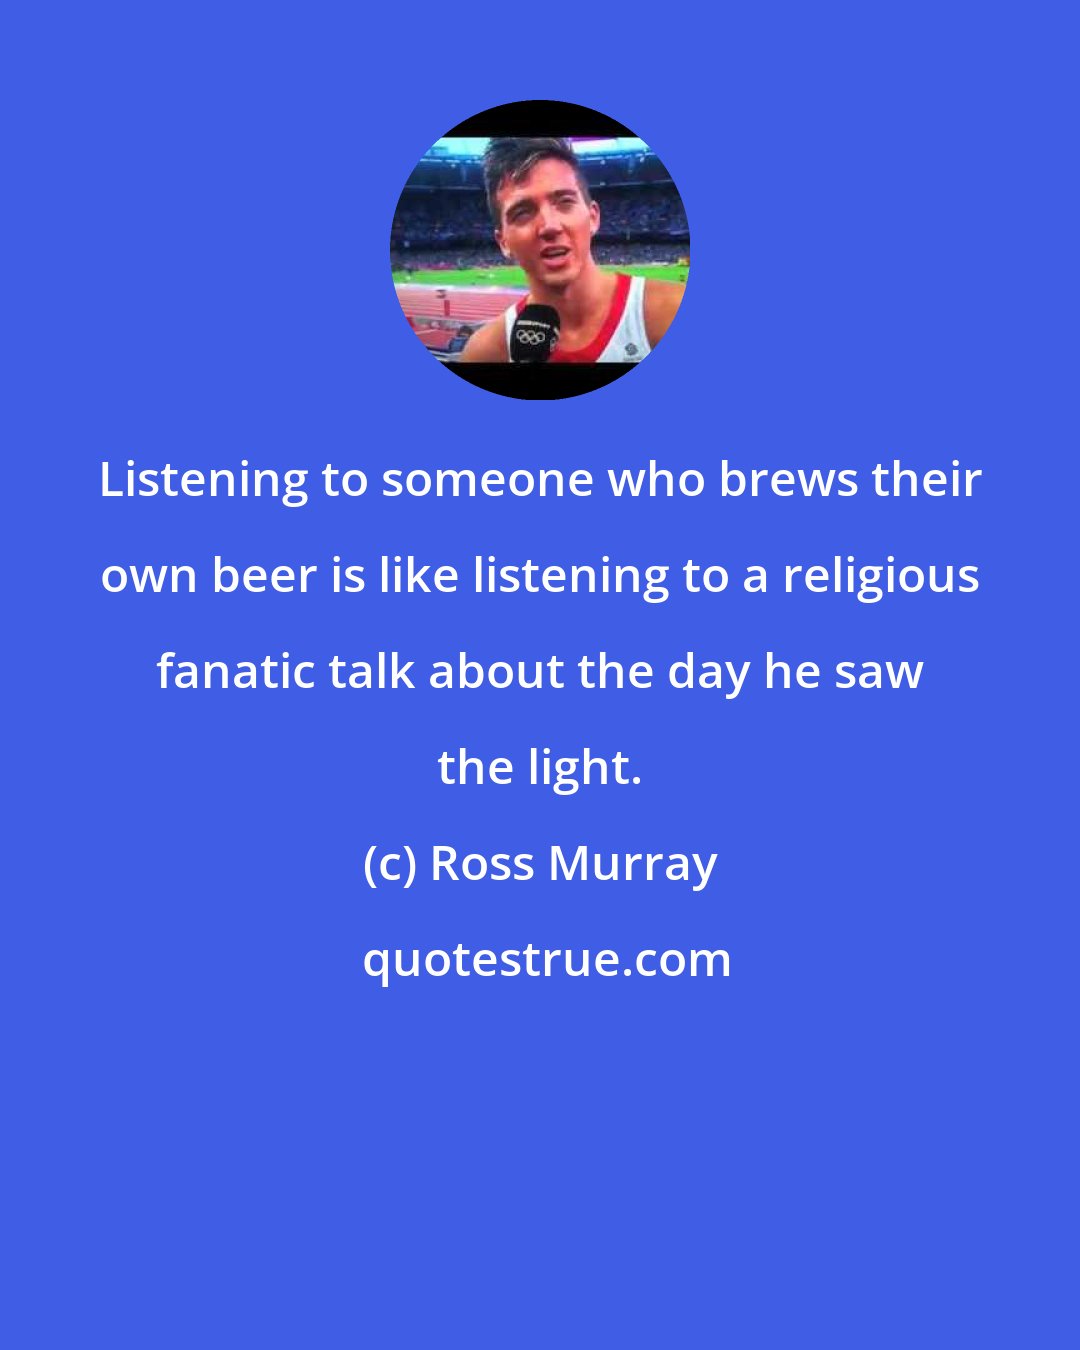 Ross Murray: Listening to someone who brews their own beer is like listening to a religious fanatic talk about the day he saw the light.